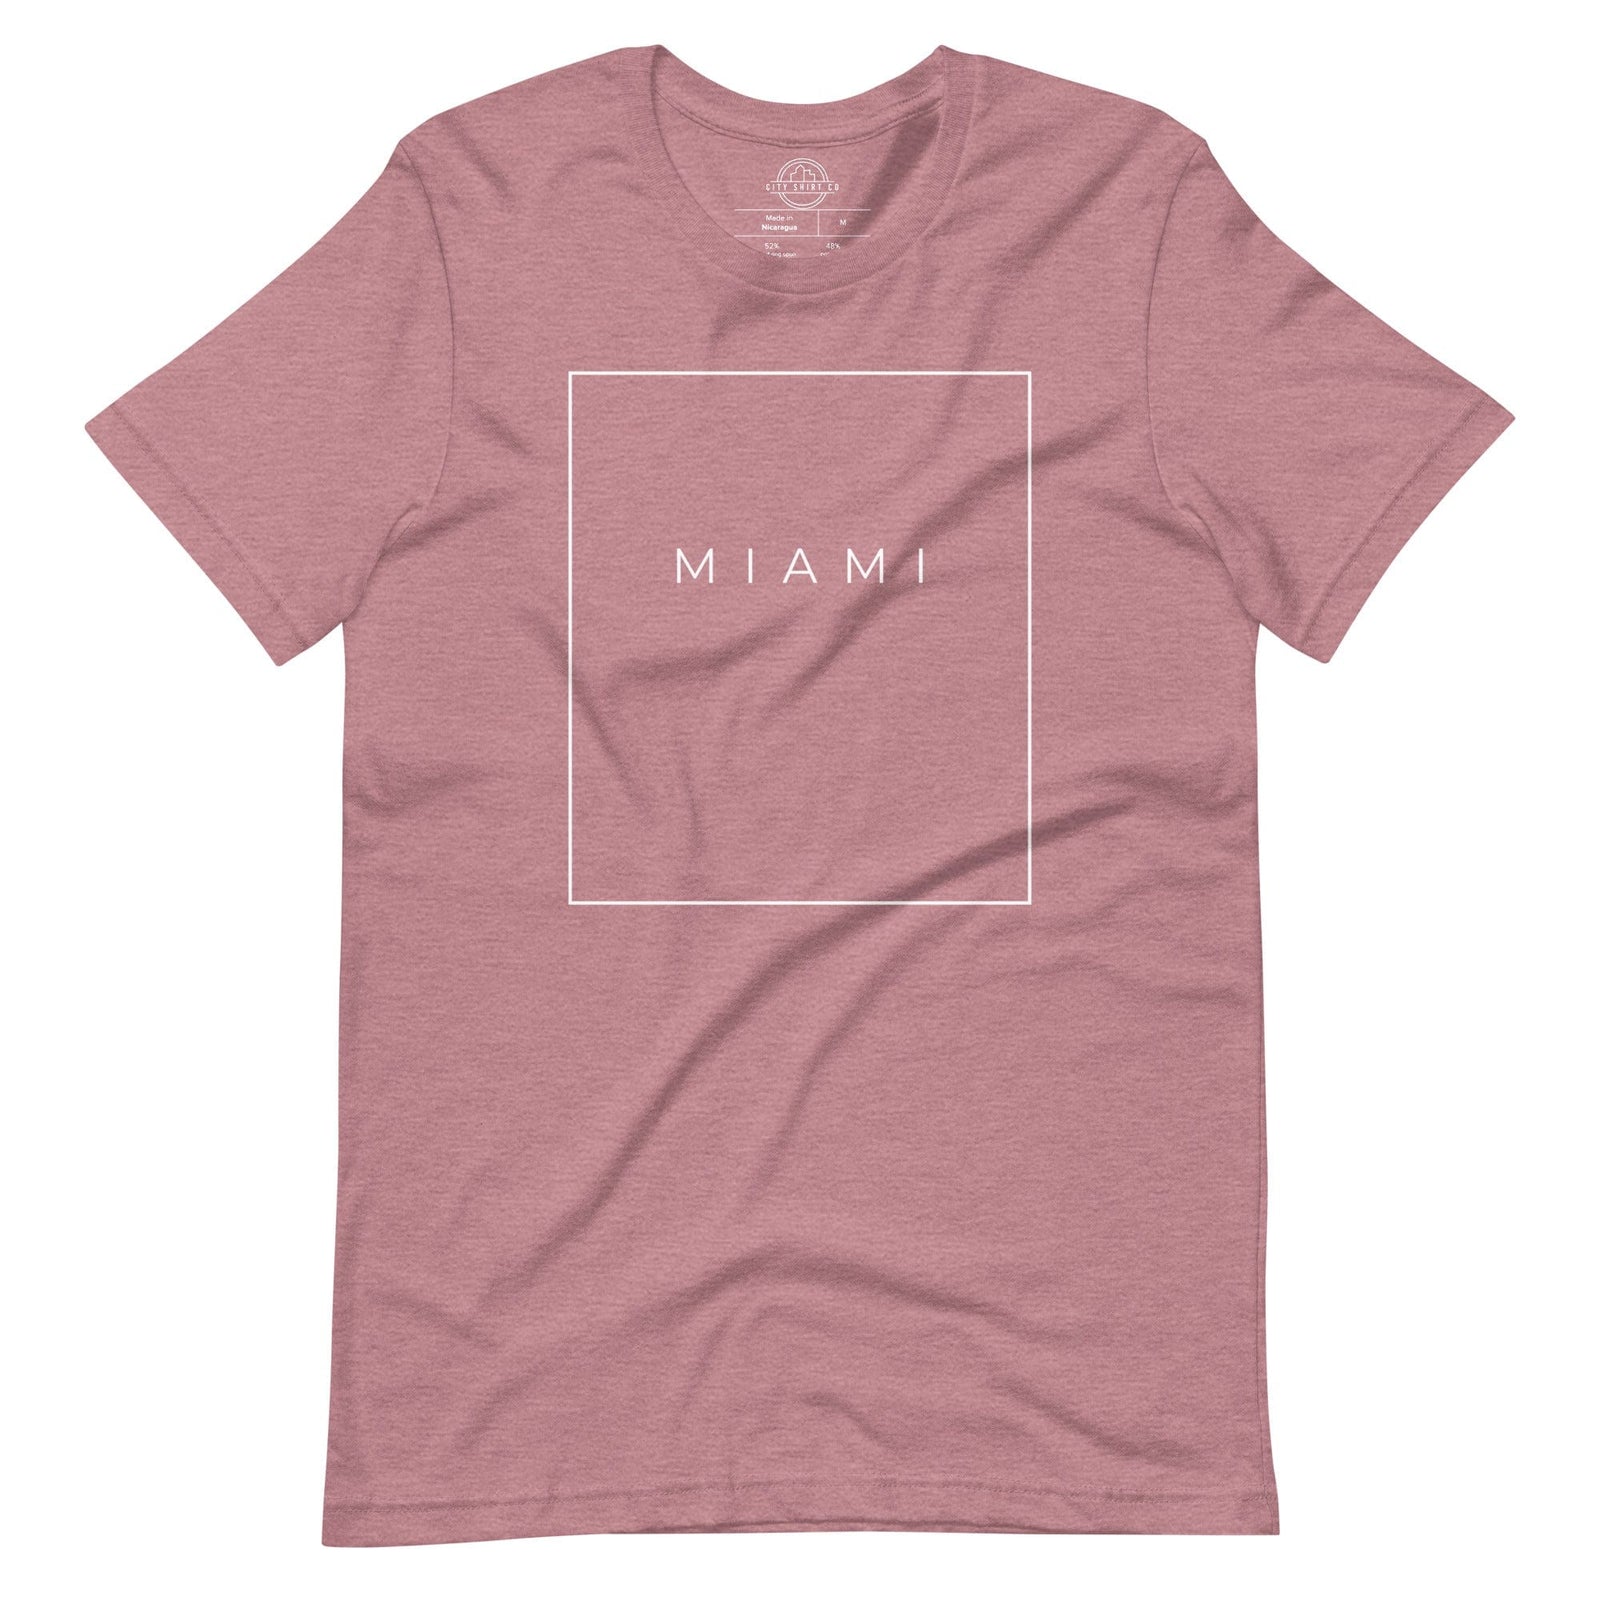 City Shirt Co Miami Essential T-Shirt Heather Orchid / S